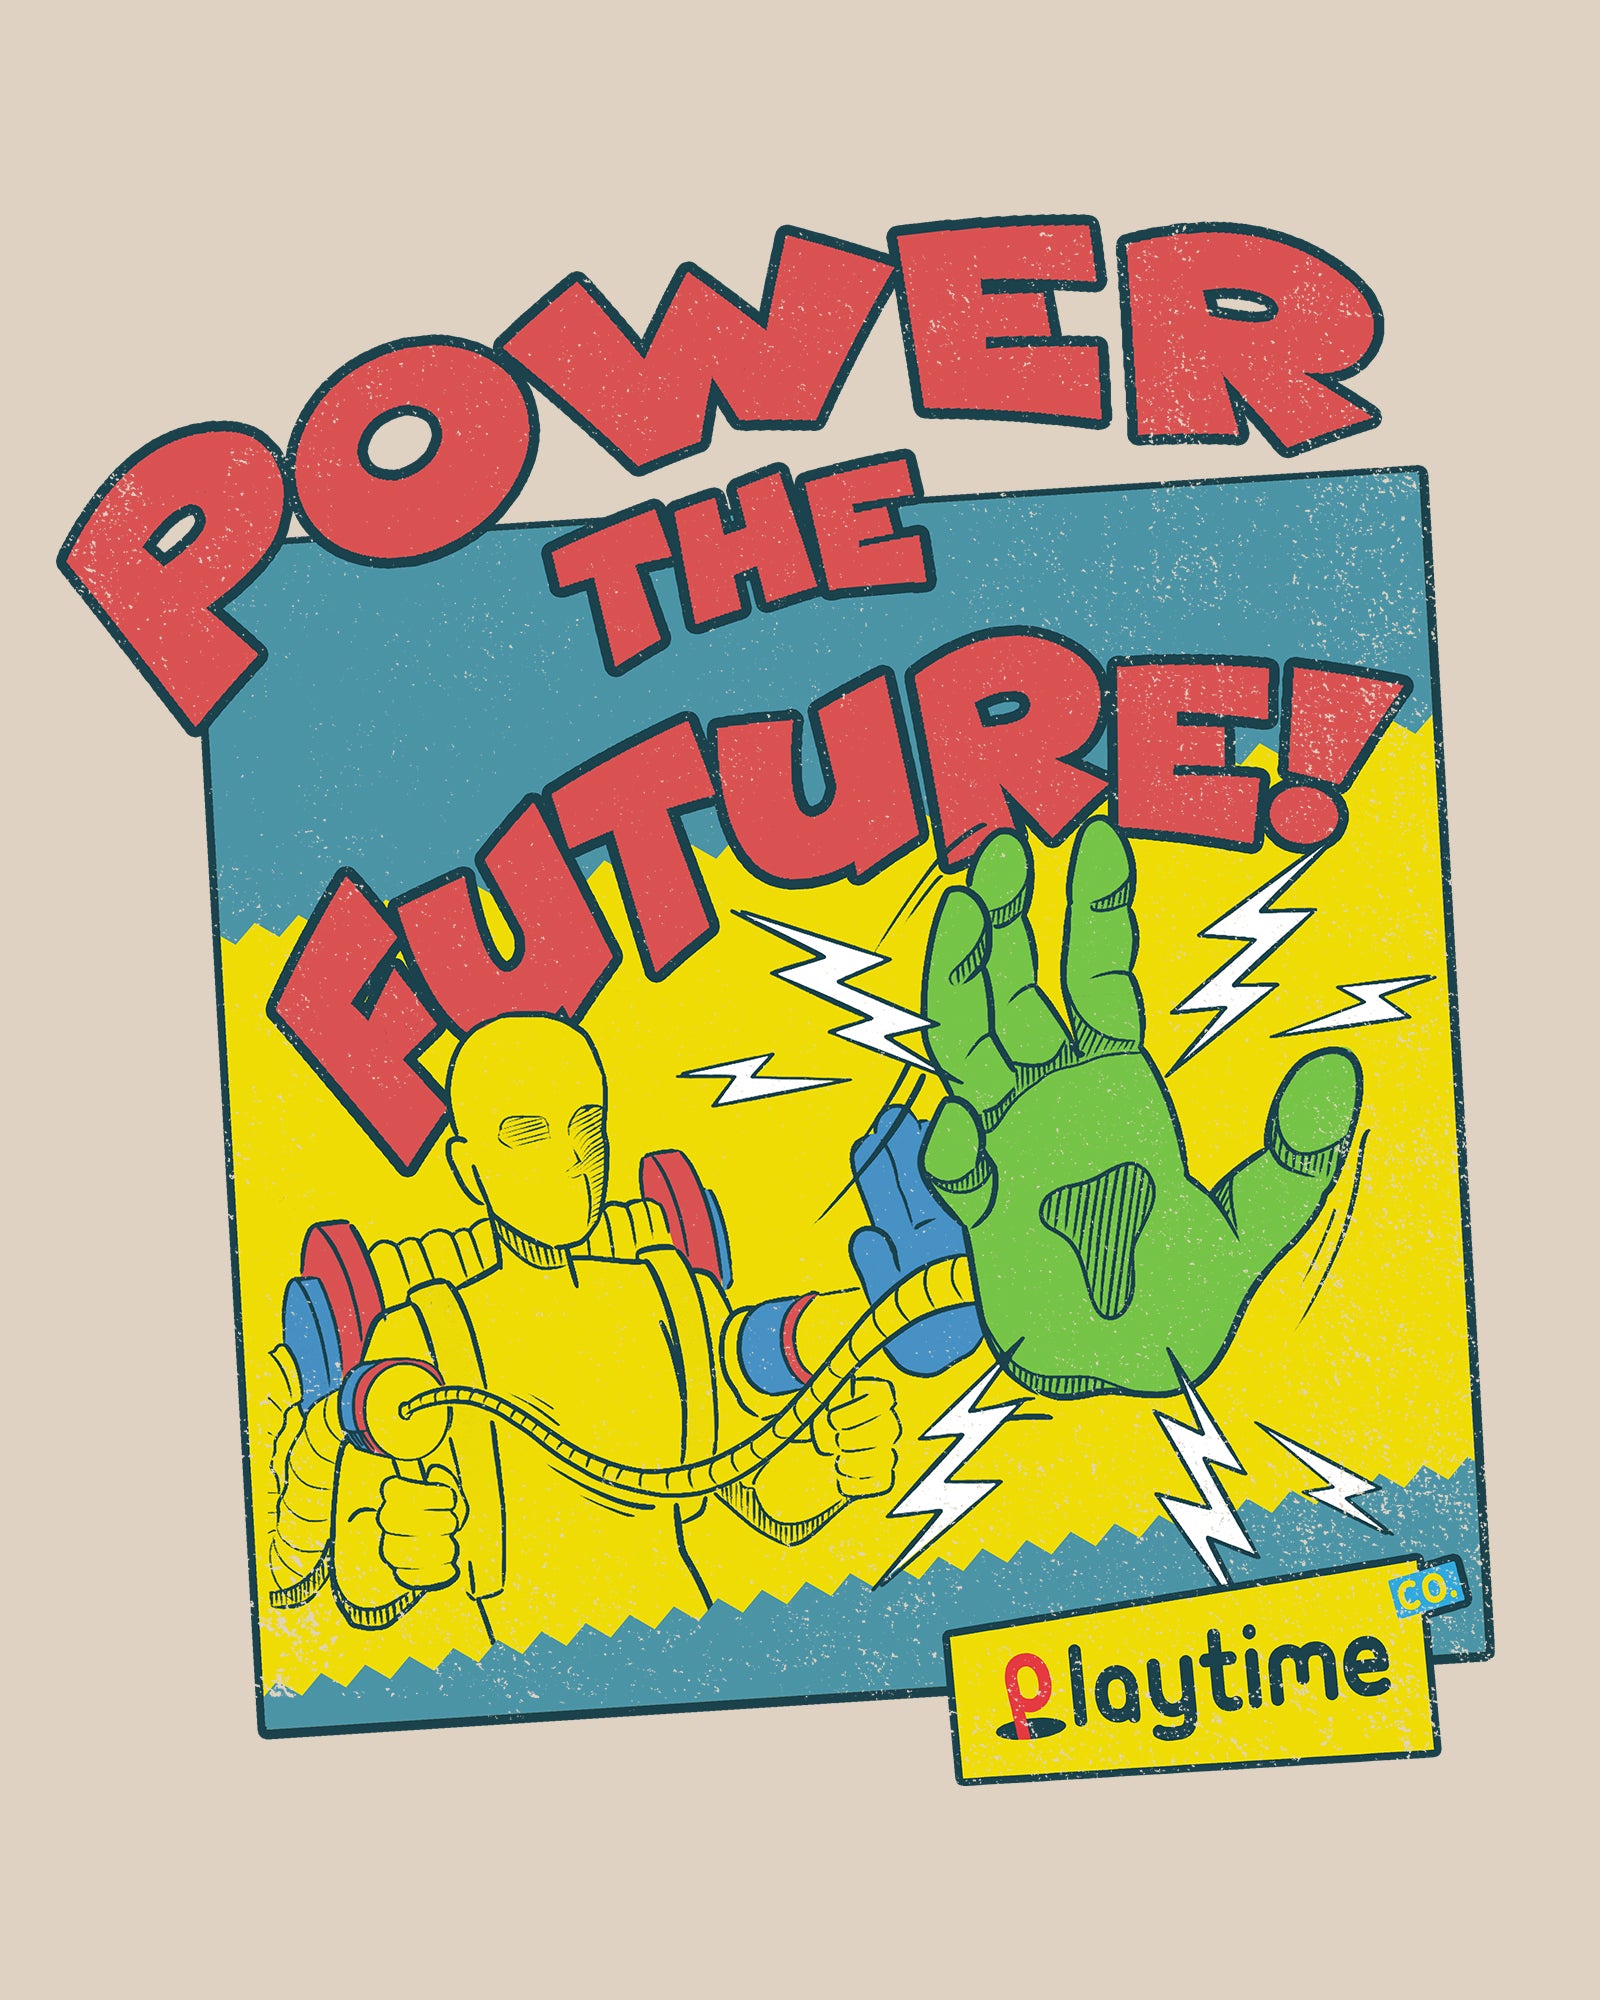 image on shirt: player avatar character using device to grab with right hand. text: power to the future playtime co.